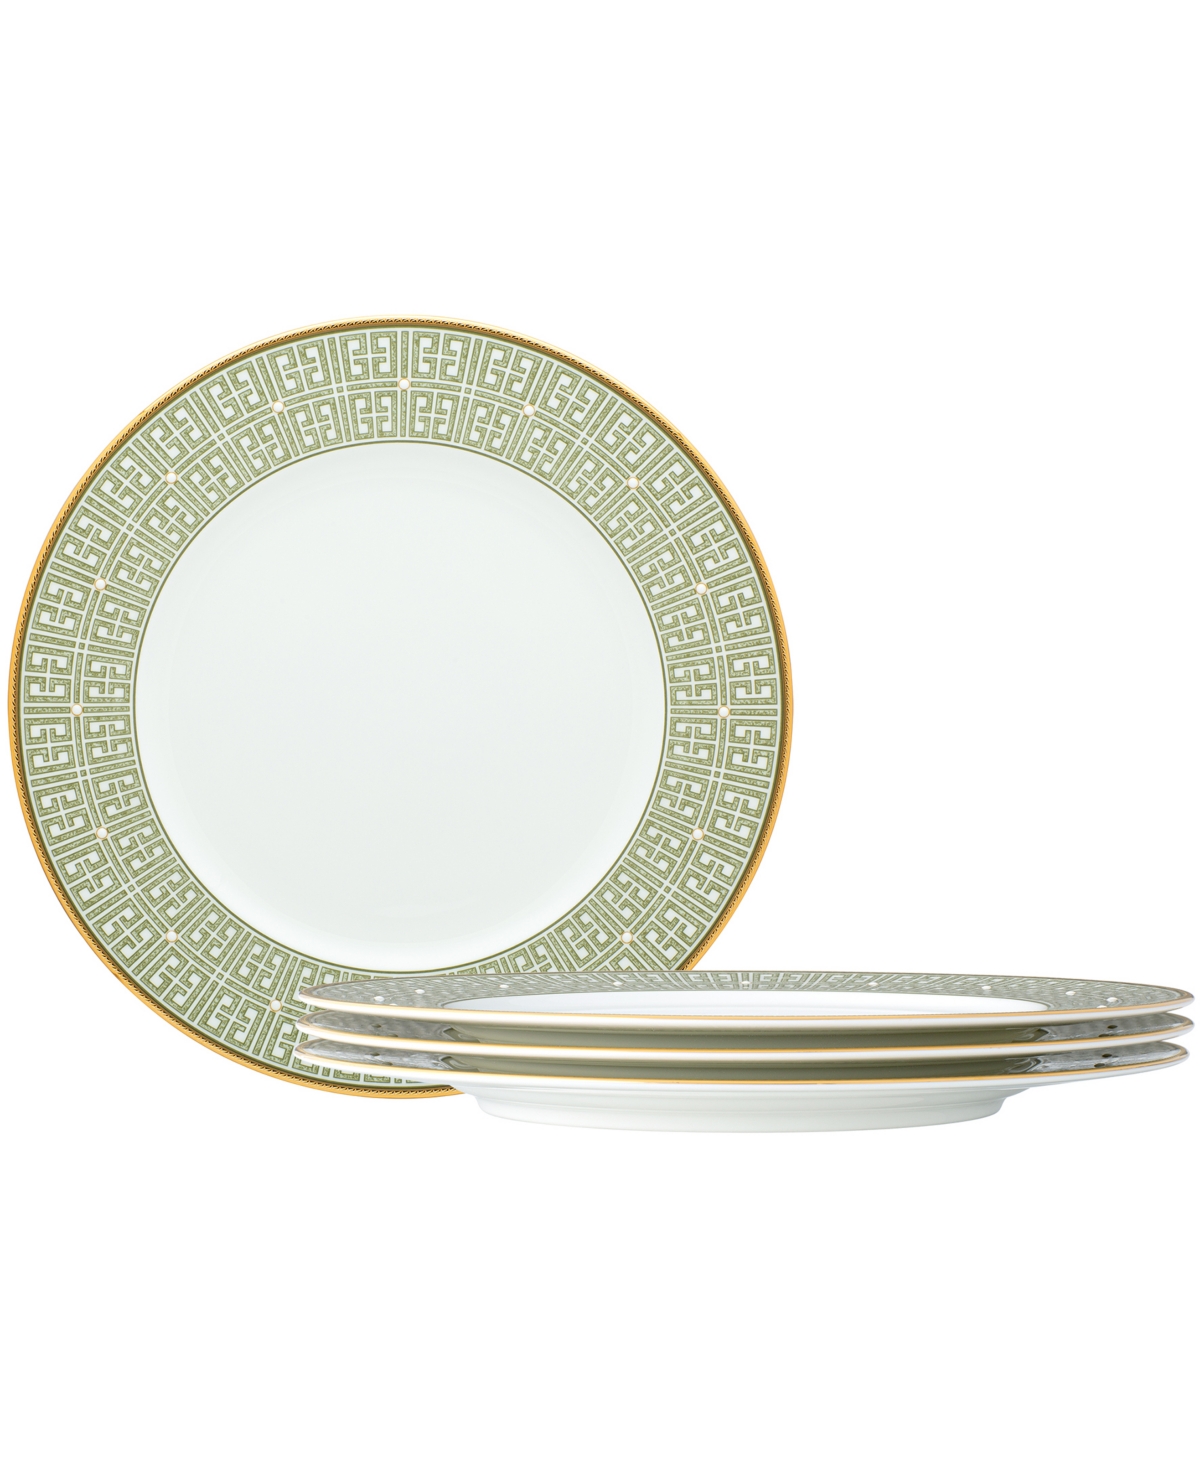 Noritake Infinity 4 Piece Dinner Plate Set, Service For 4 In Green Gold